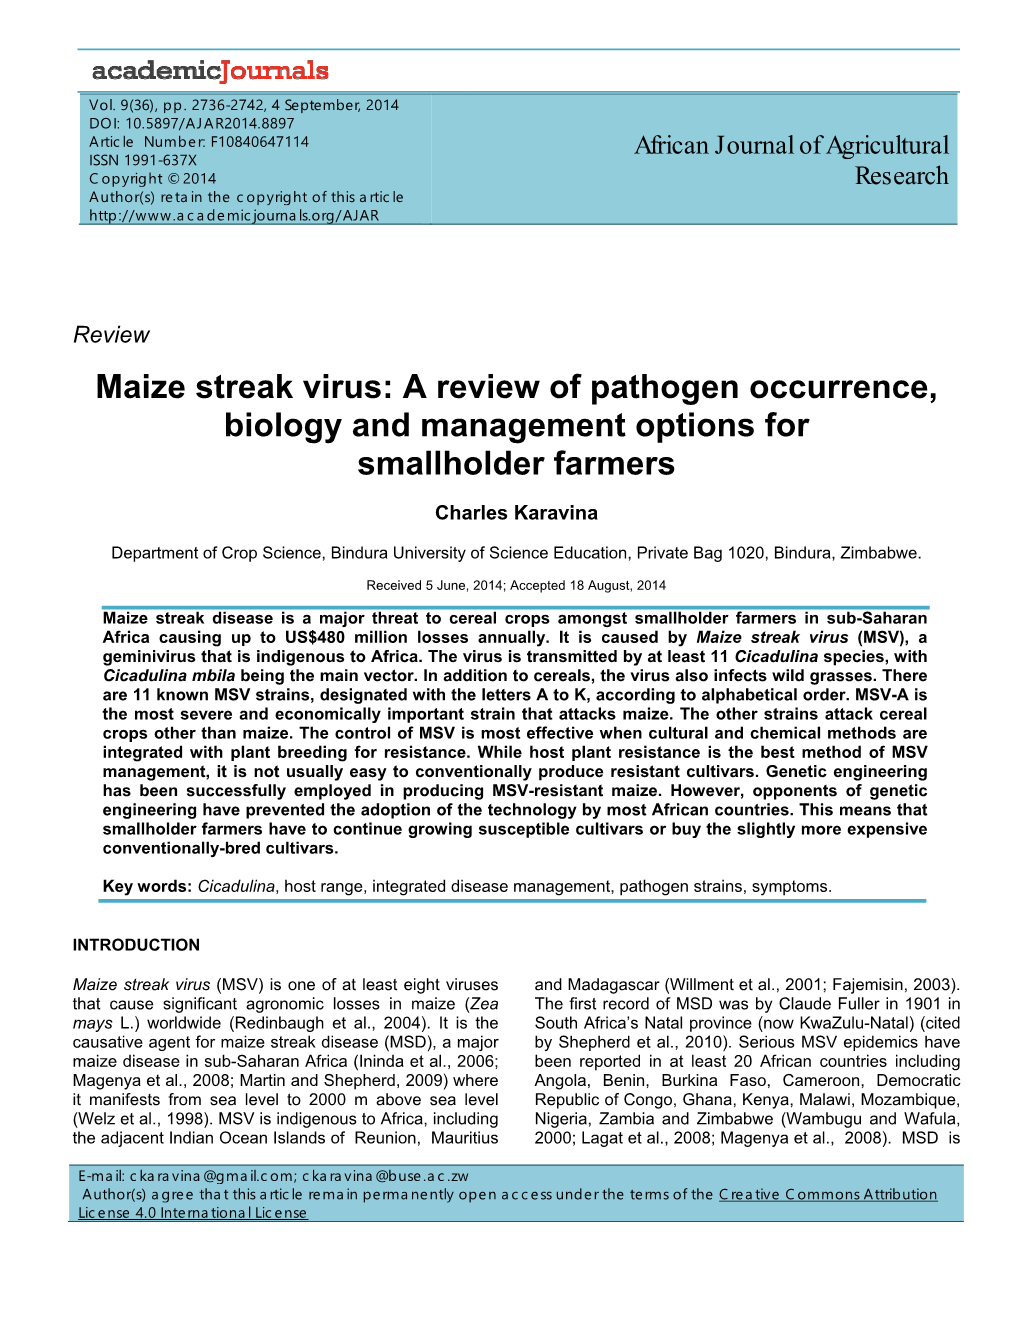 Maize Streak Virus: a Review of Pathogen Occurrence, Biology and Management Options for Smallholder Farmers